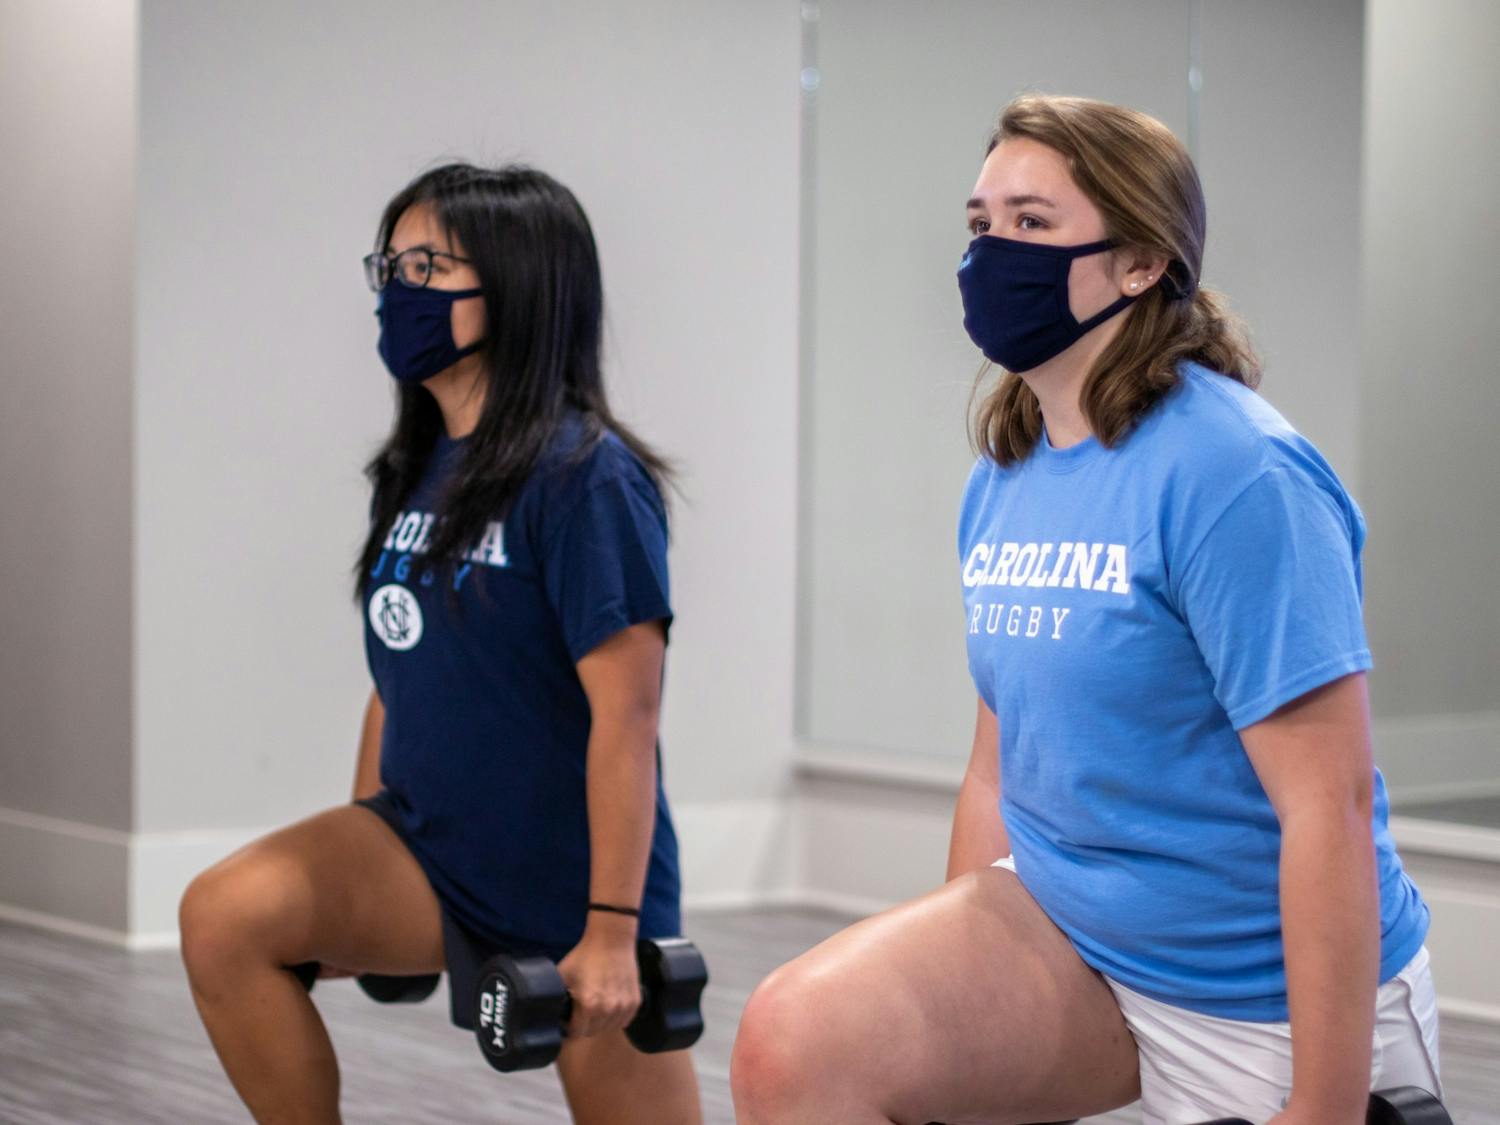 Sophomore policitcal science and environmental studies major Rebecca Lee works out with senior Amy Chau, president of the women's rugby team. The team has continued to work out on their own in small groups to continue community-building and spending time together during the pnandemic.